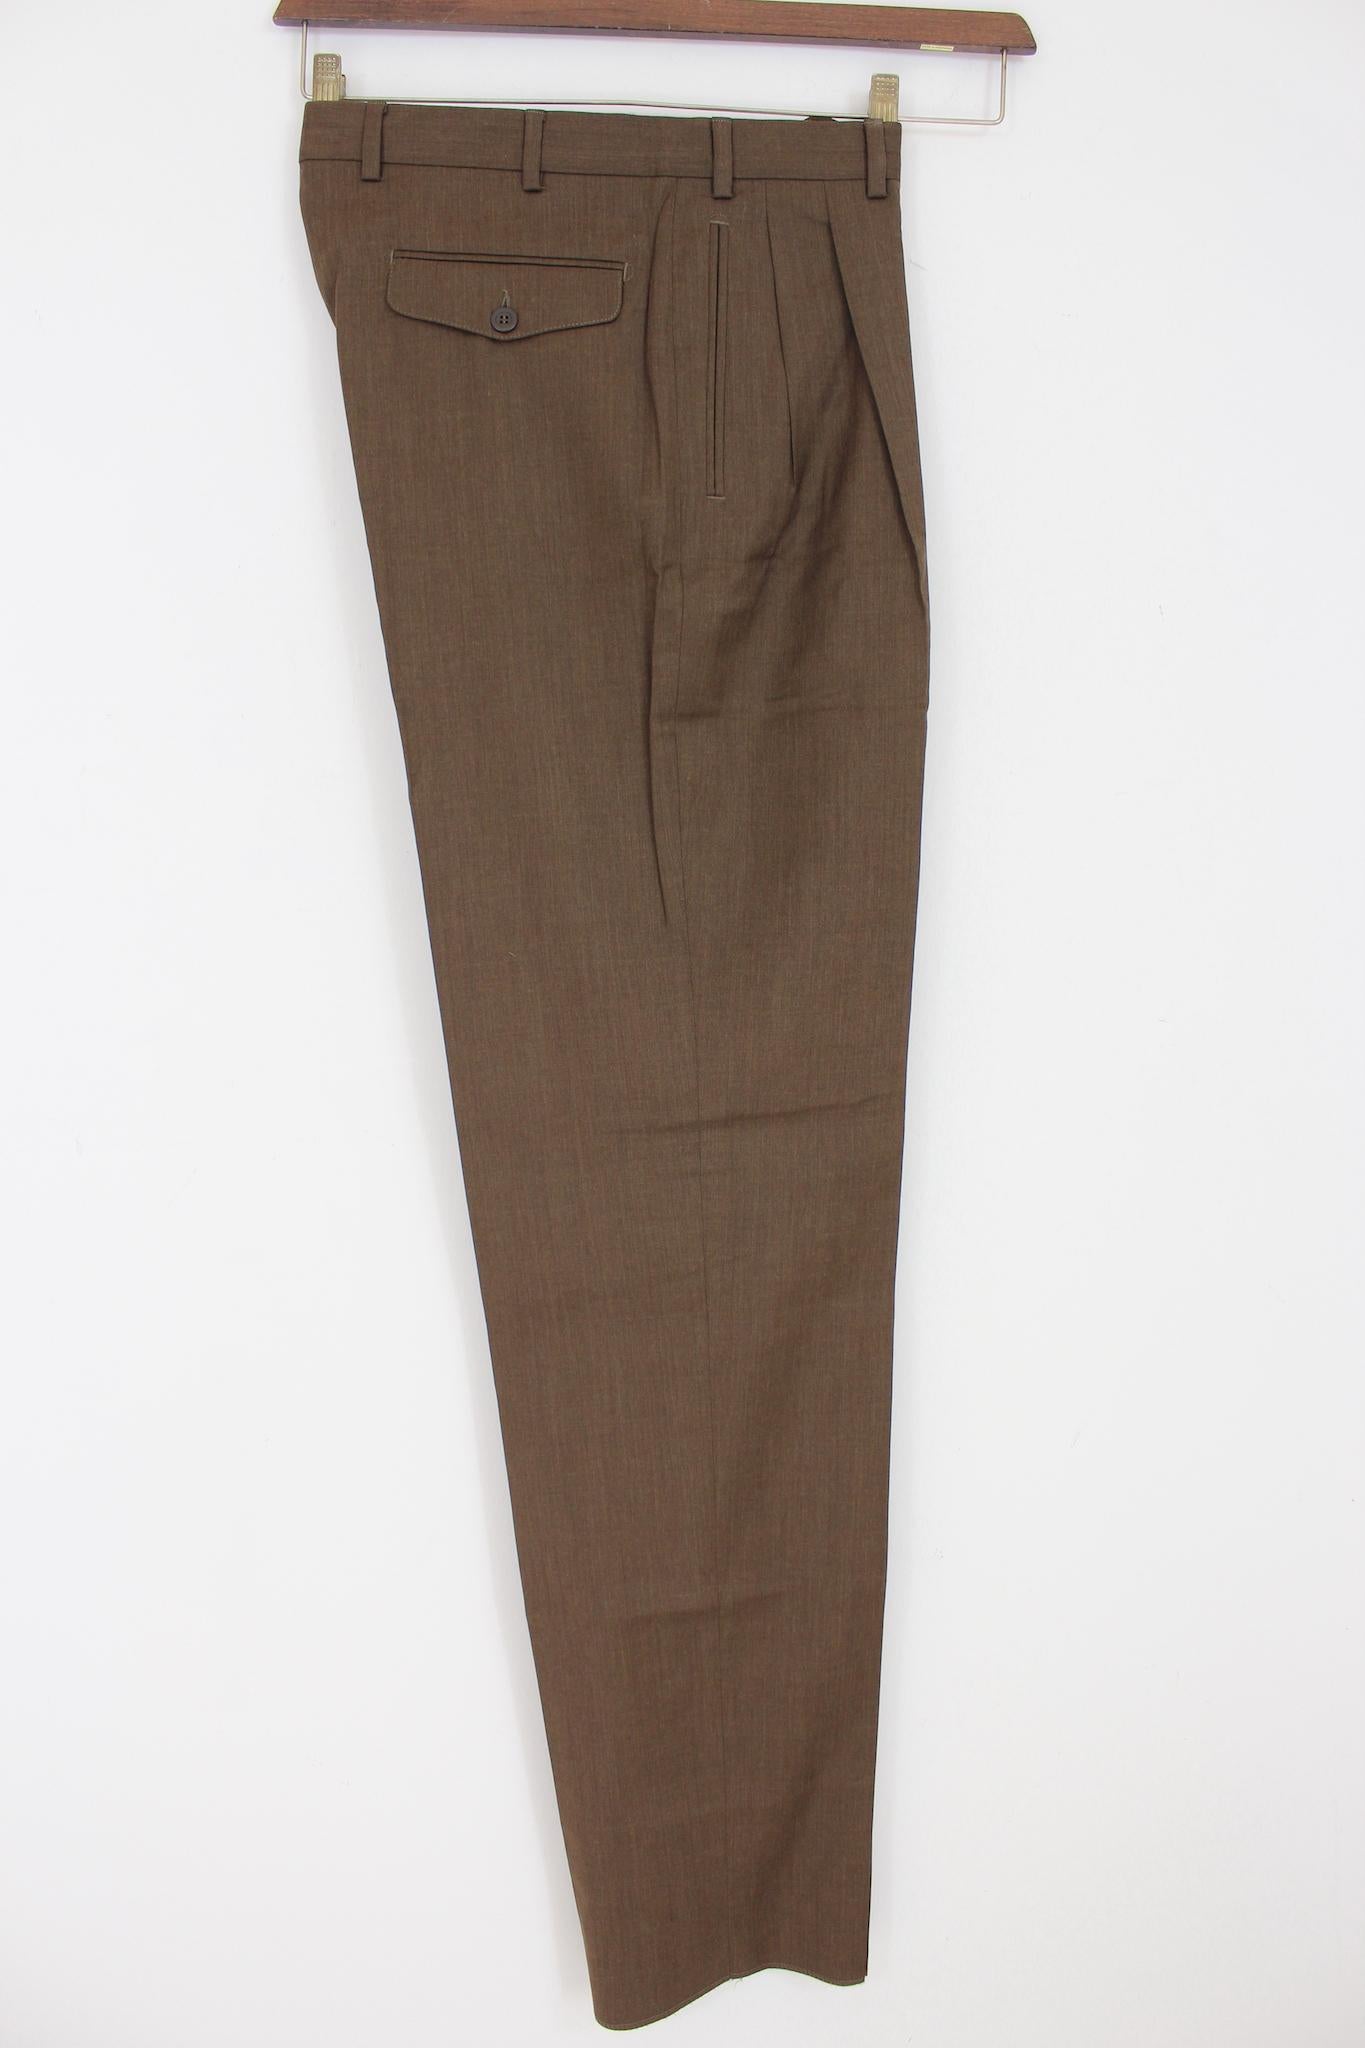 Loro Piana classic vintage 90s trousers. Brown color, 100% Tasmanian wool. Made in Italy. Coming from stock fund.

Size: 48 It 38 Us 38 Uk

Waist: 41 cm
Length: 120 cm
Hem: 21 cm
Pant crotch: 94 cm